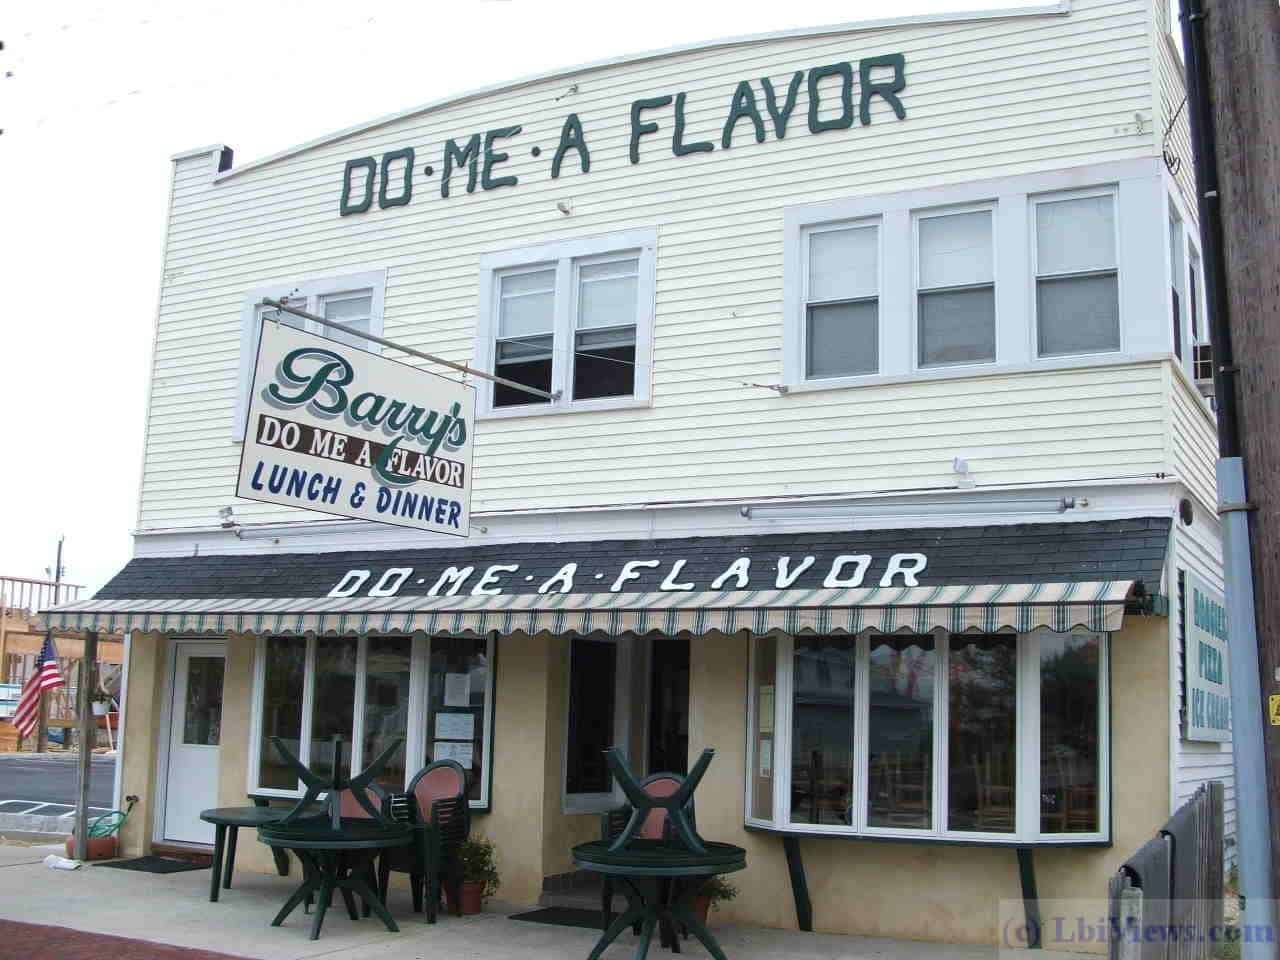 Barry's Do Me a Flavor Ice Cream and Food in Beach Haven, NJ